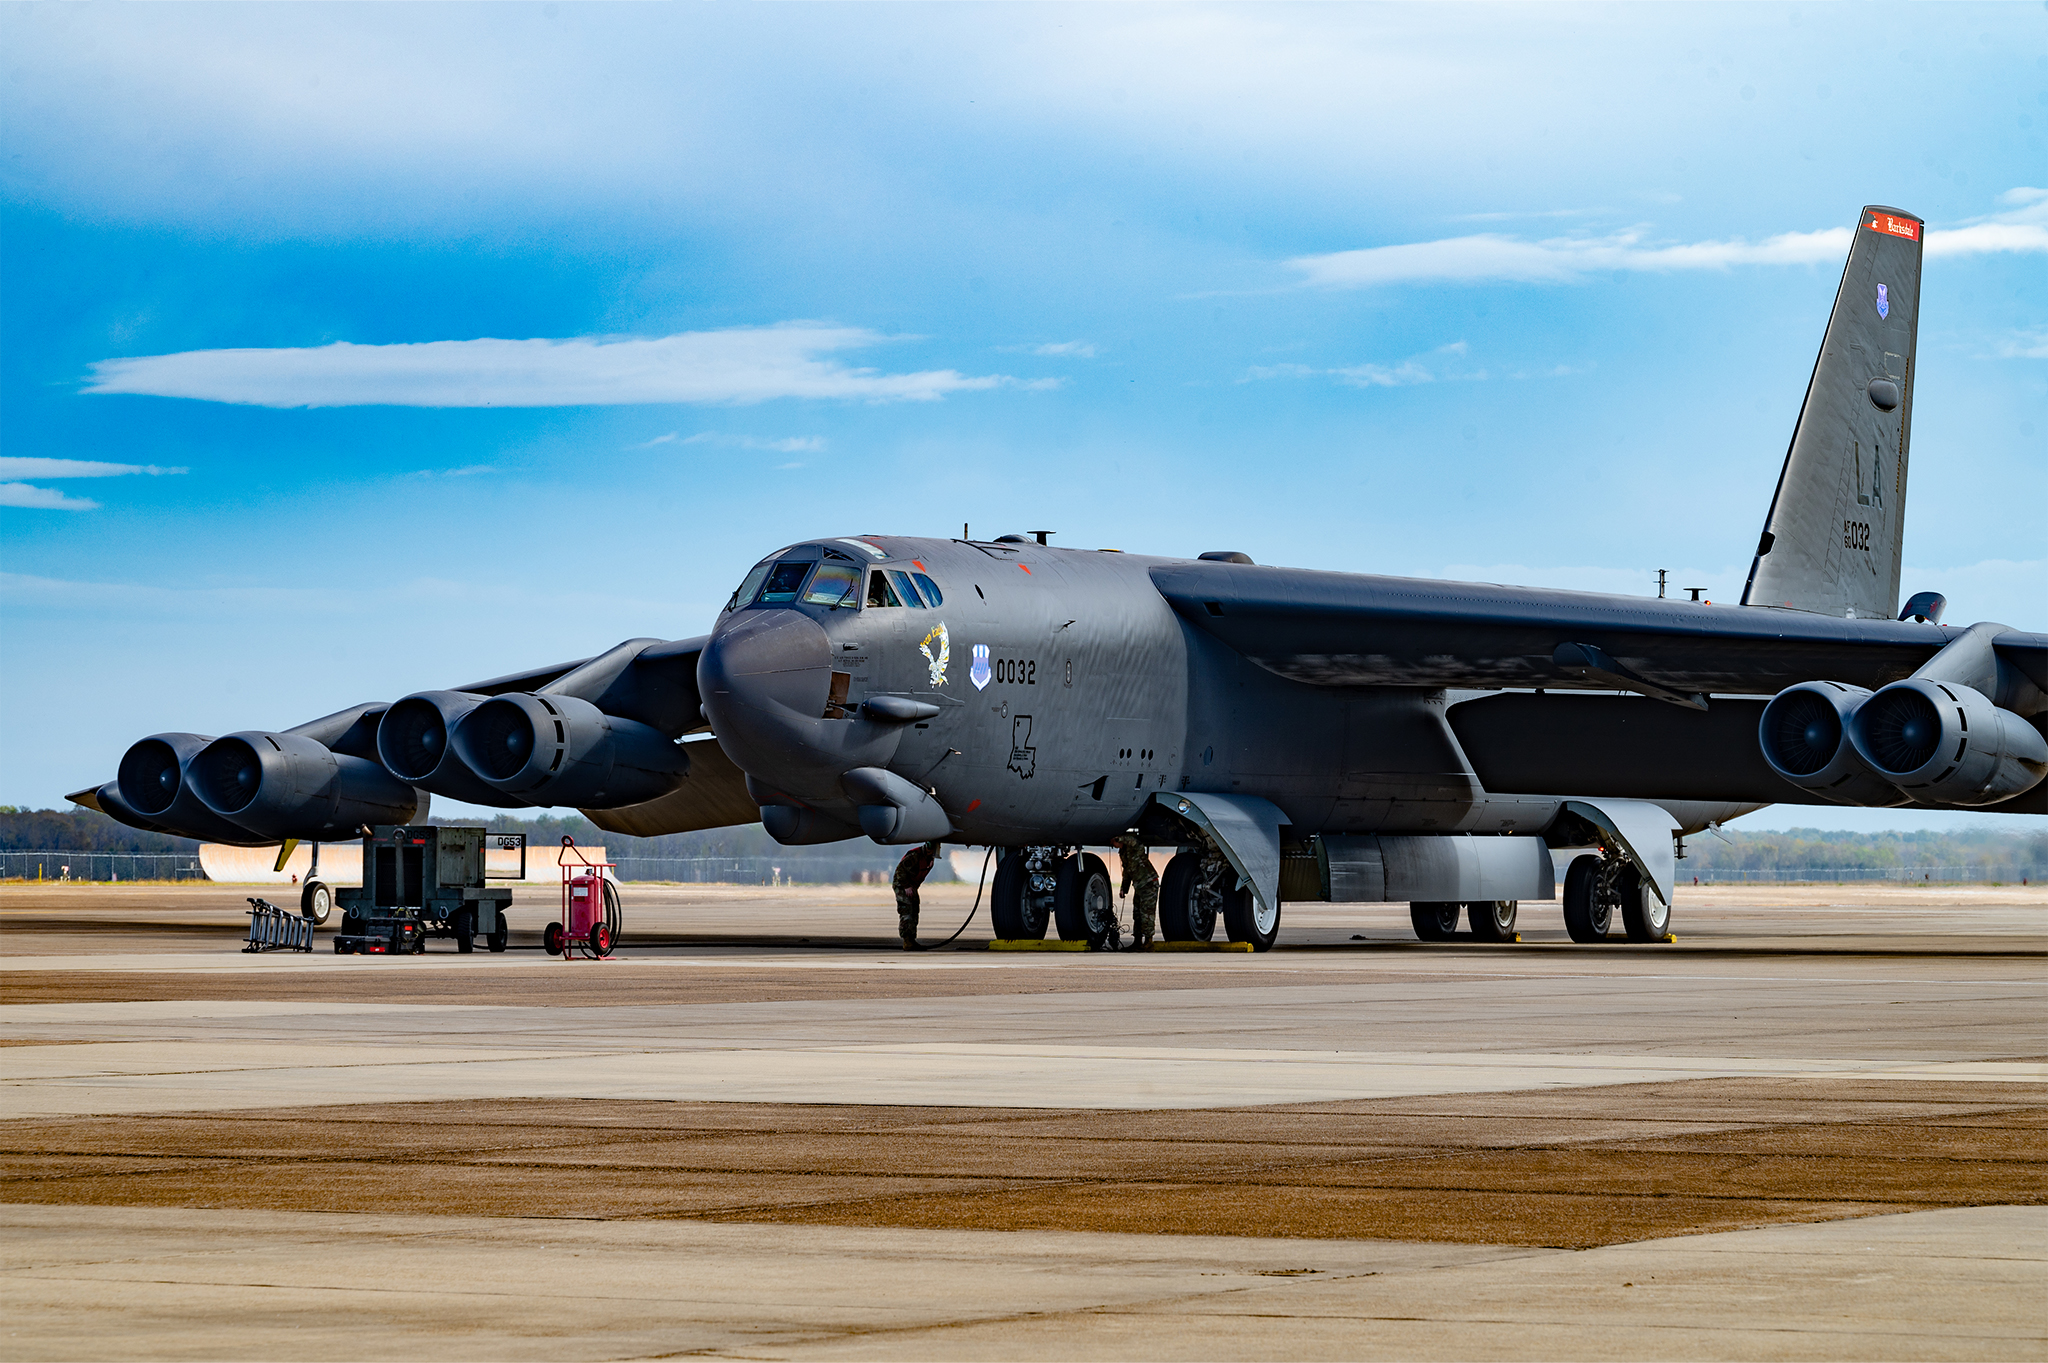 At Barksdale, B-52 Crews Are in High Demand—And Looking Forward to Upgrades